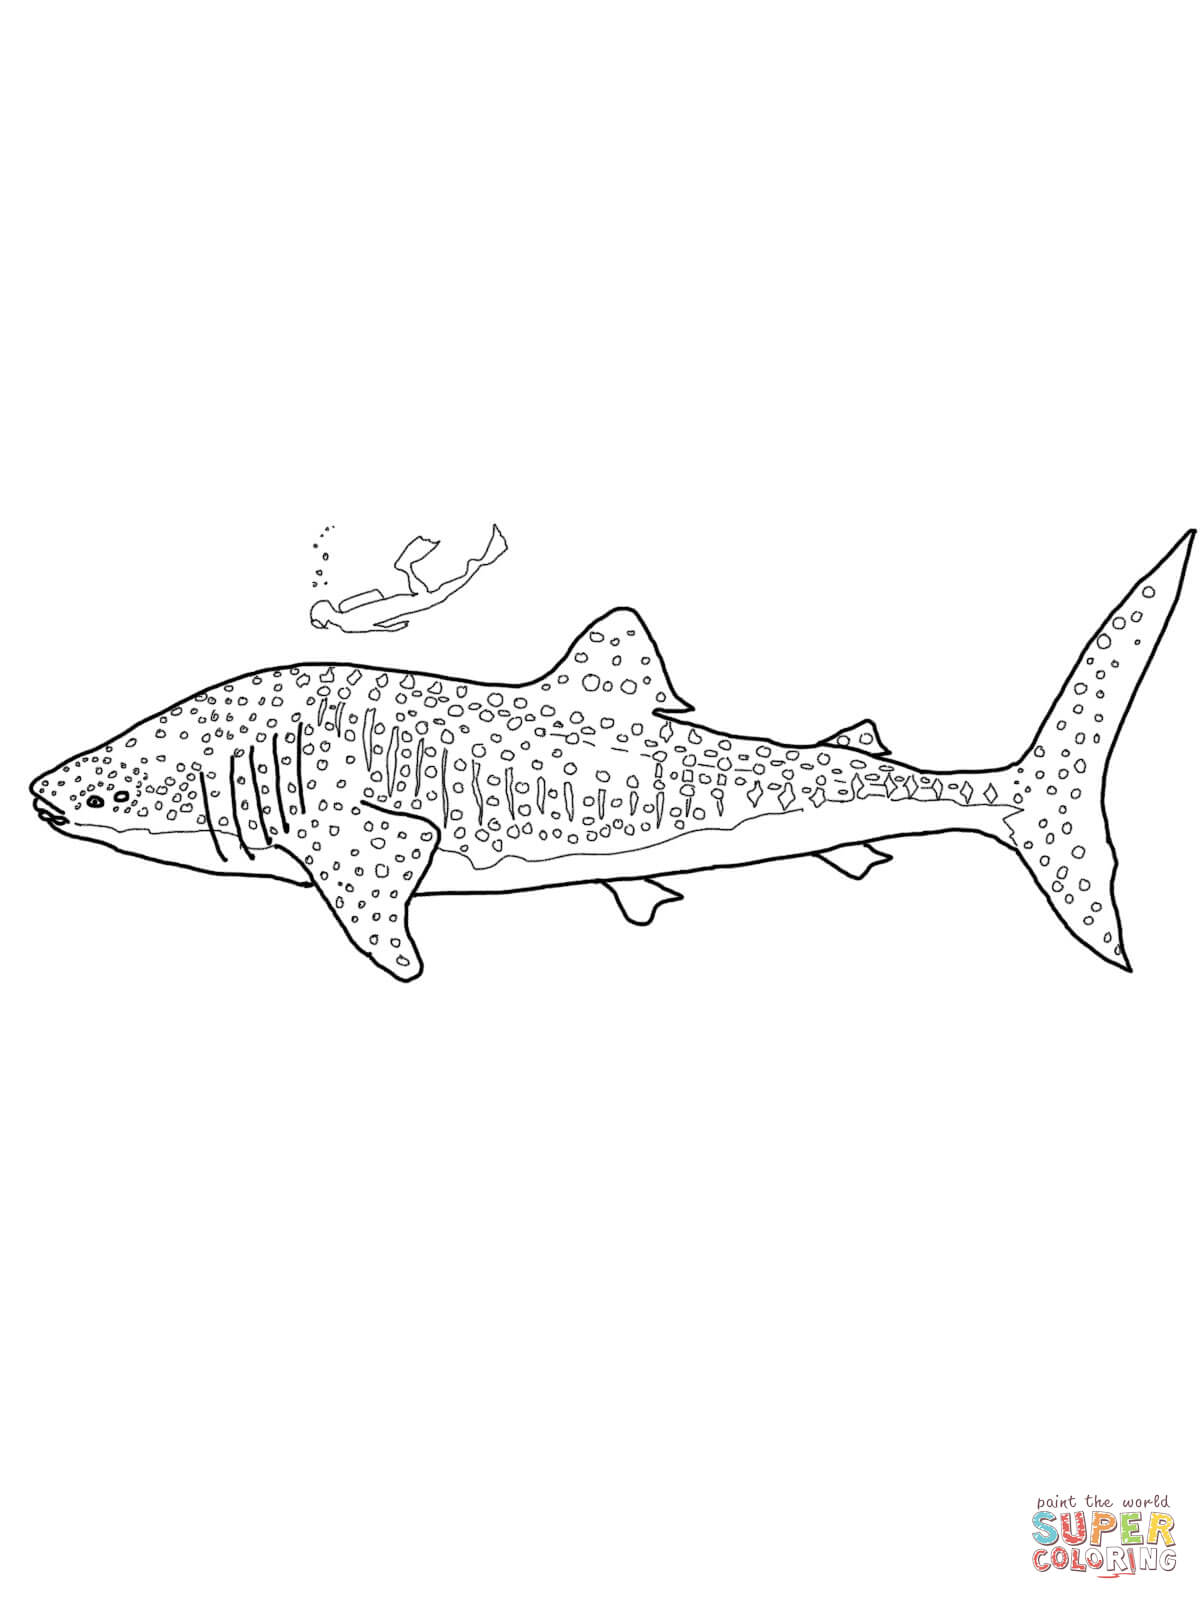 Sharkwhale coloring #5, Download drawings